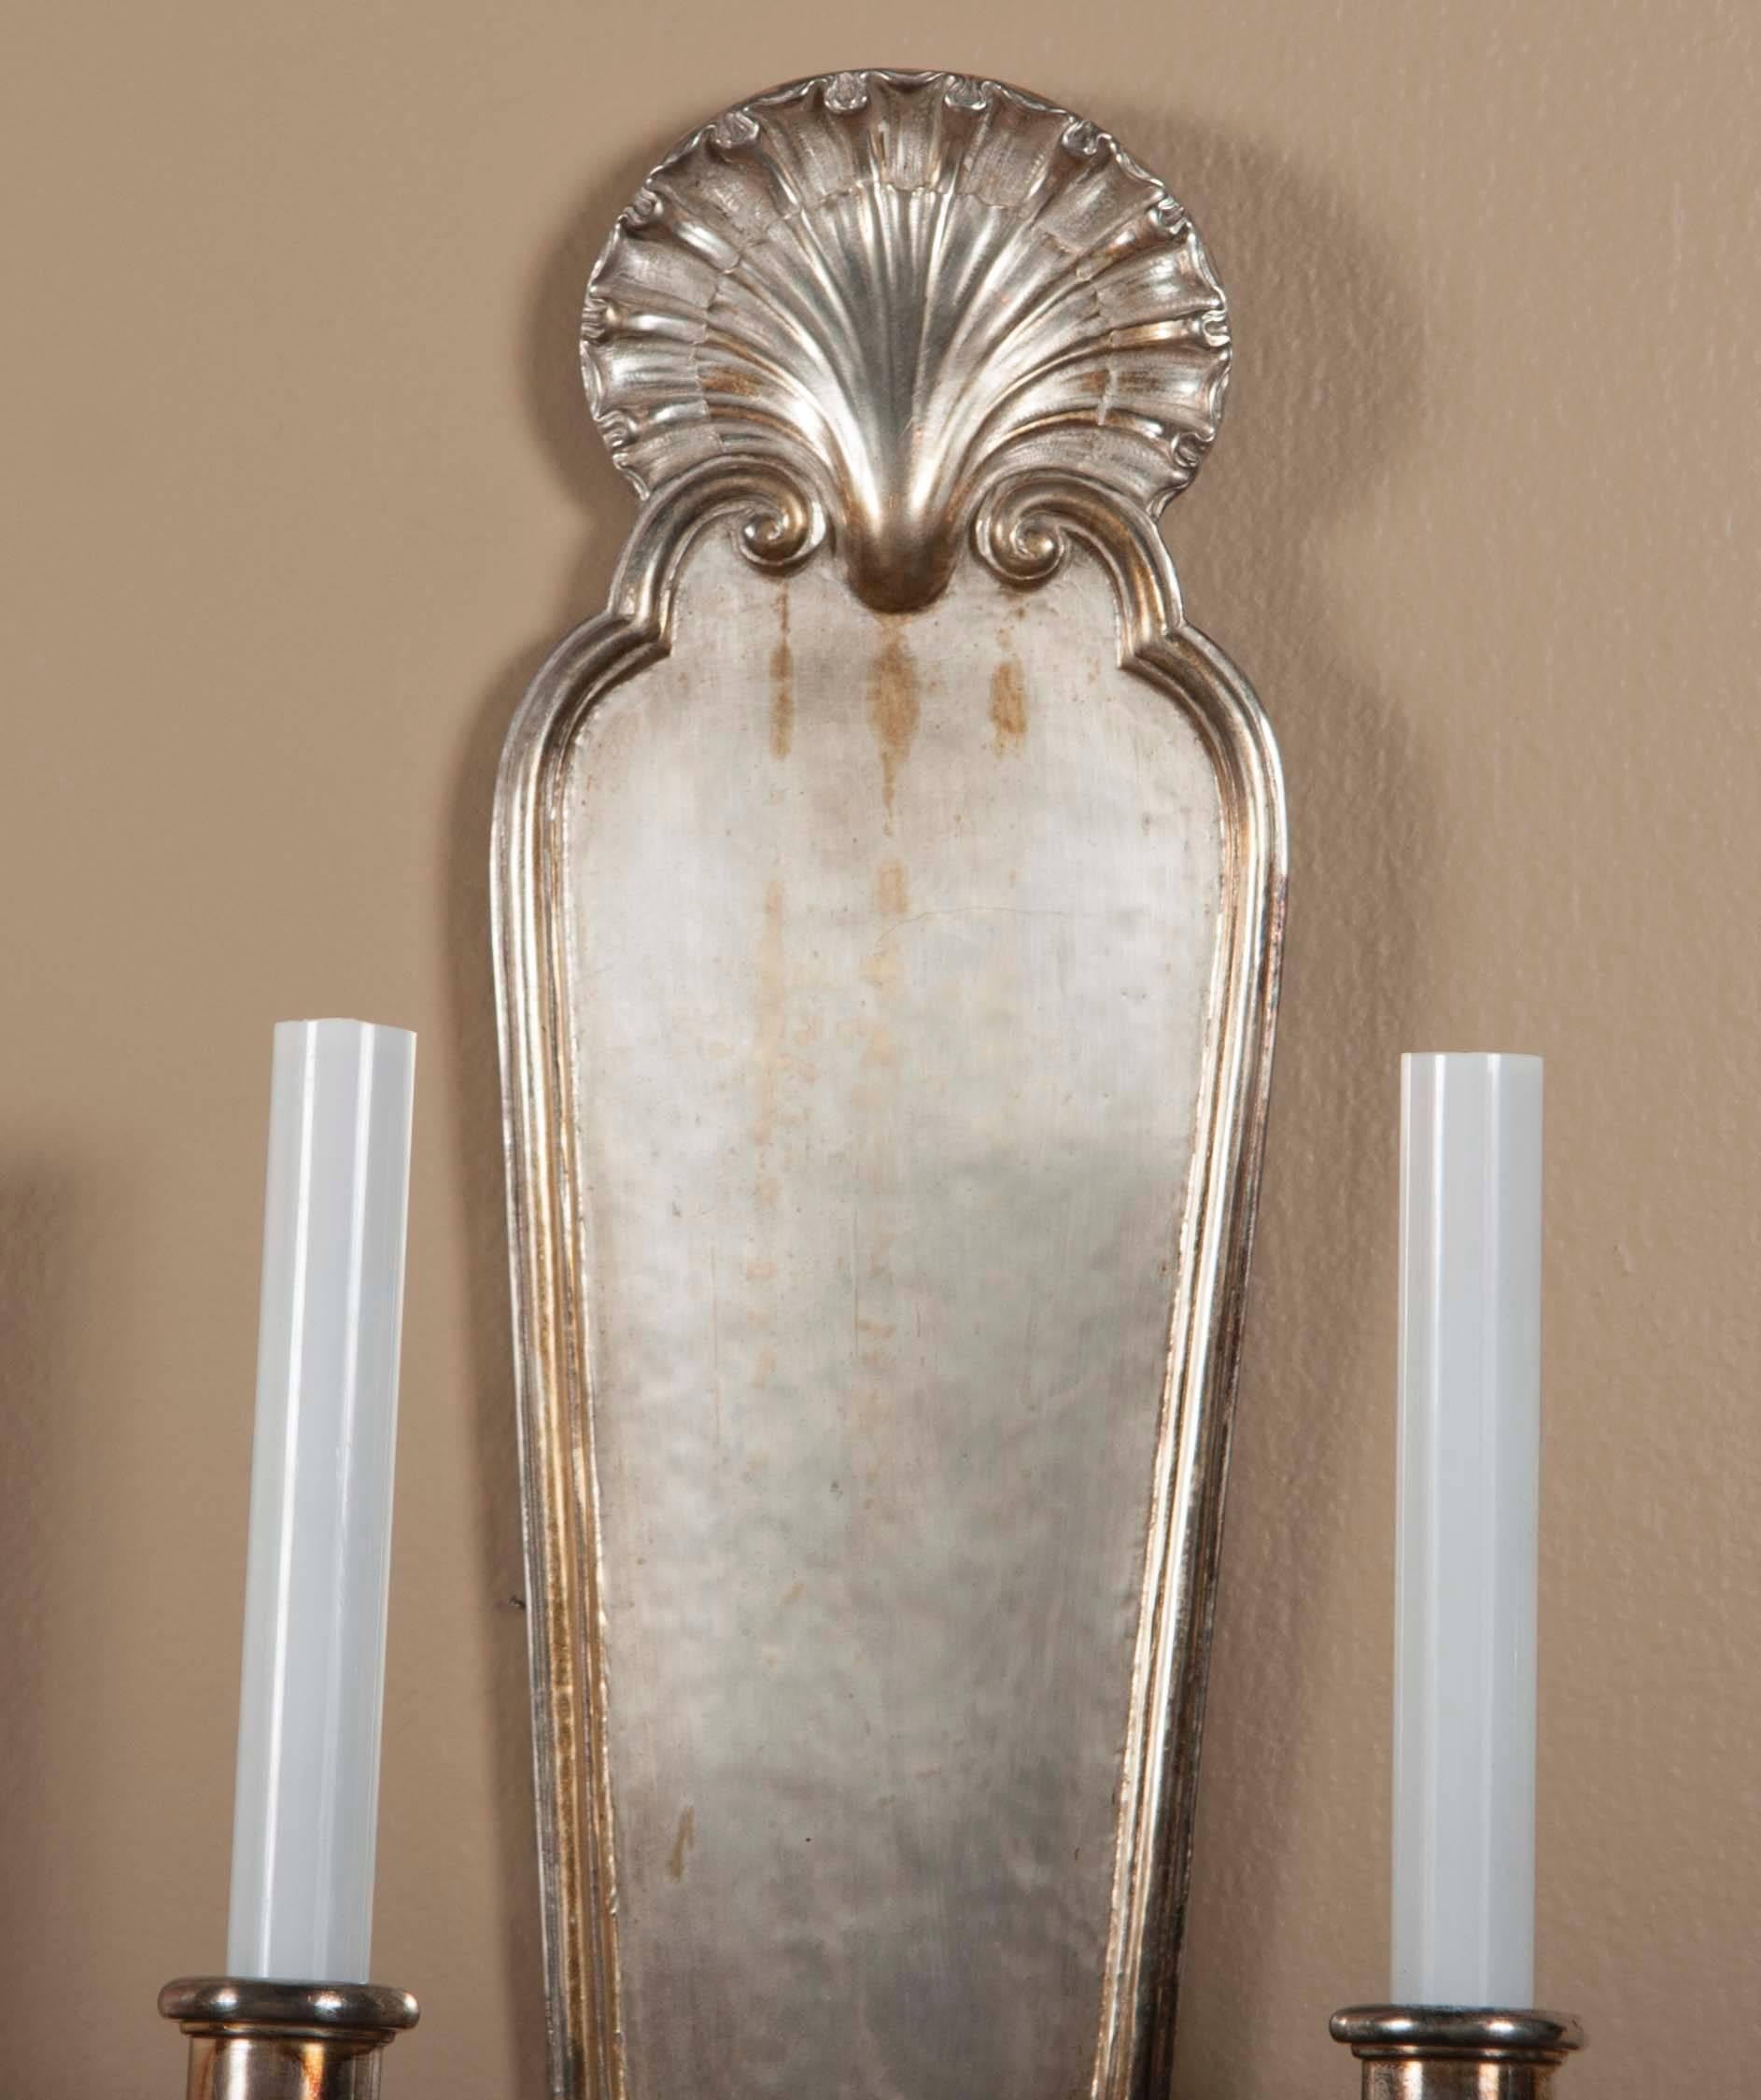 A pair of silver over bronze wall sconces by E.F Caldwell. One pair available.

Signed.